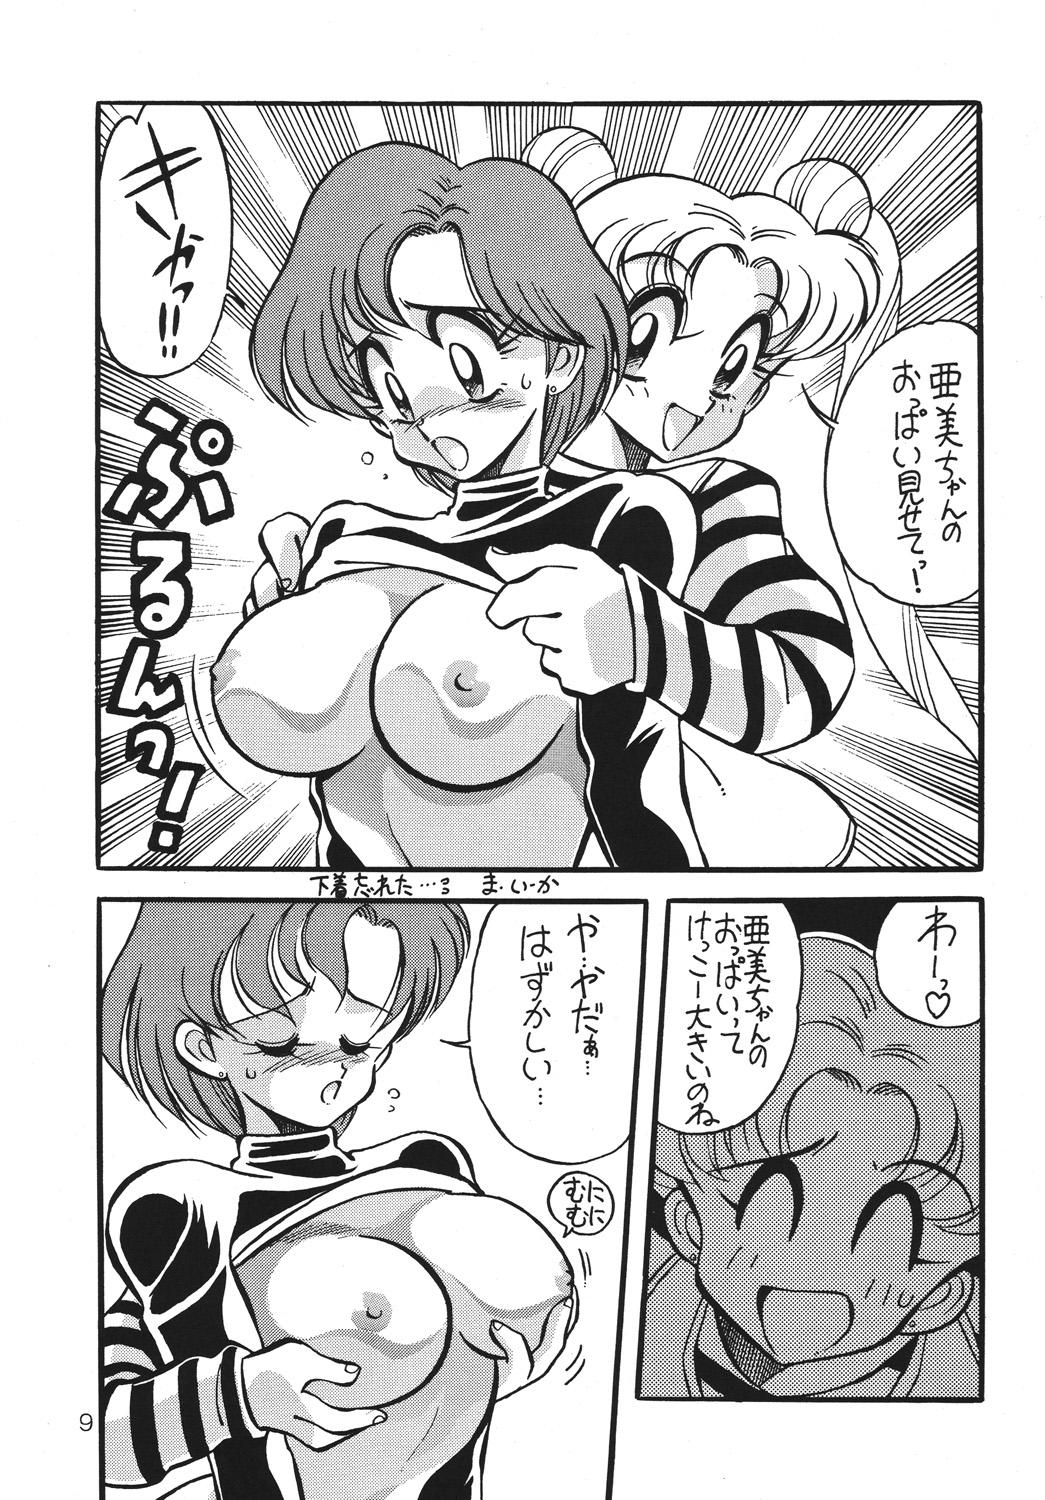 Pegging Yabou Inochi - Sailor moon Domination - Page 6